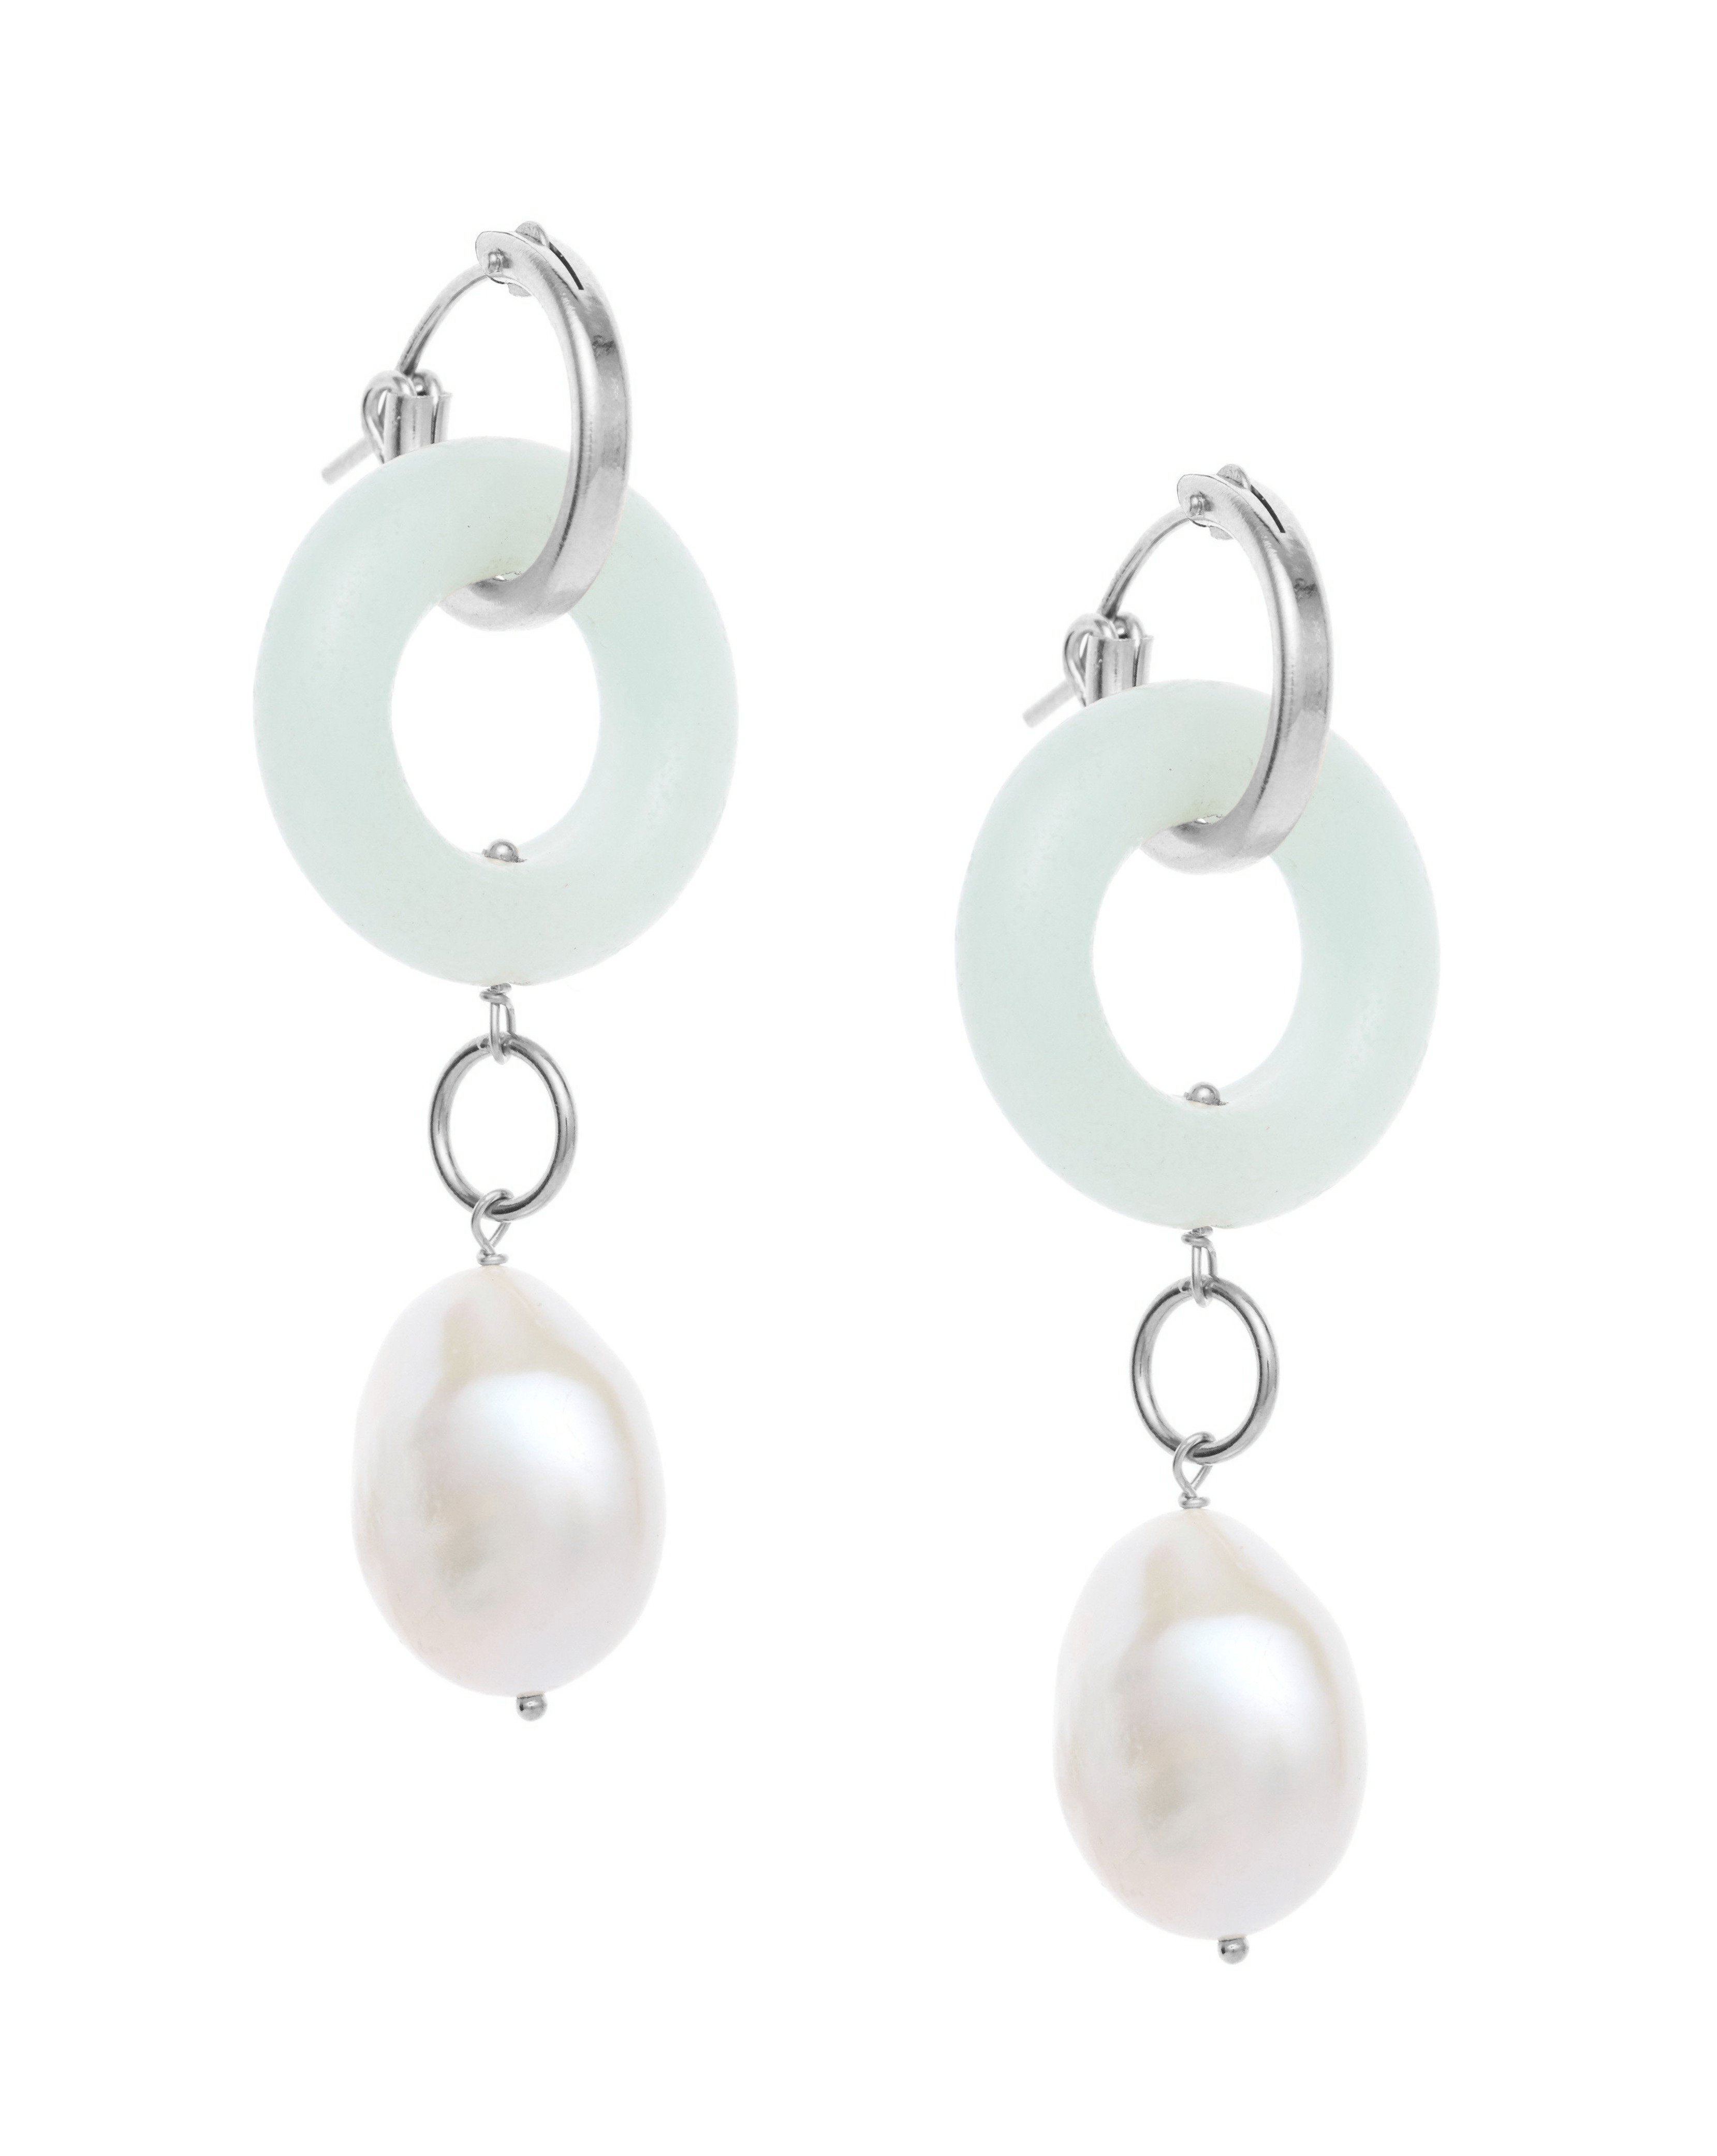 Cerceau Pearl Hoops by Kozakh. 15mm hoop dangling earrings with snap closure, crafted in Sterling Silver, featuring a doughnut shape Amazonite gemstone and a Baroque Pearl.